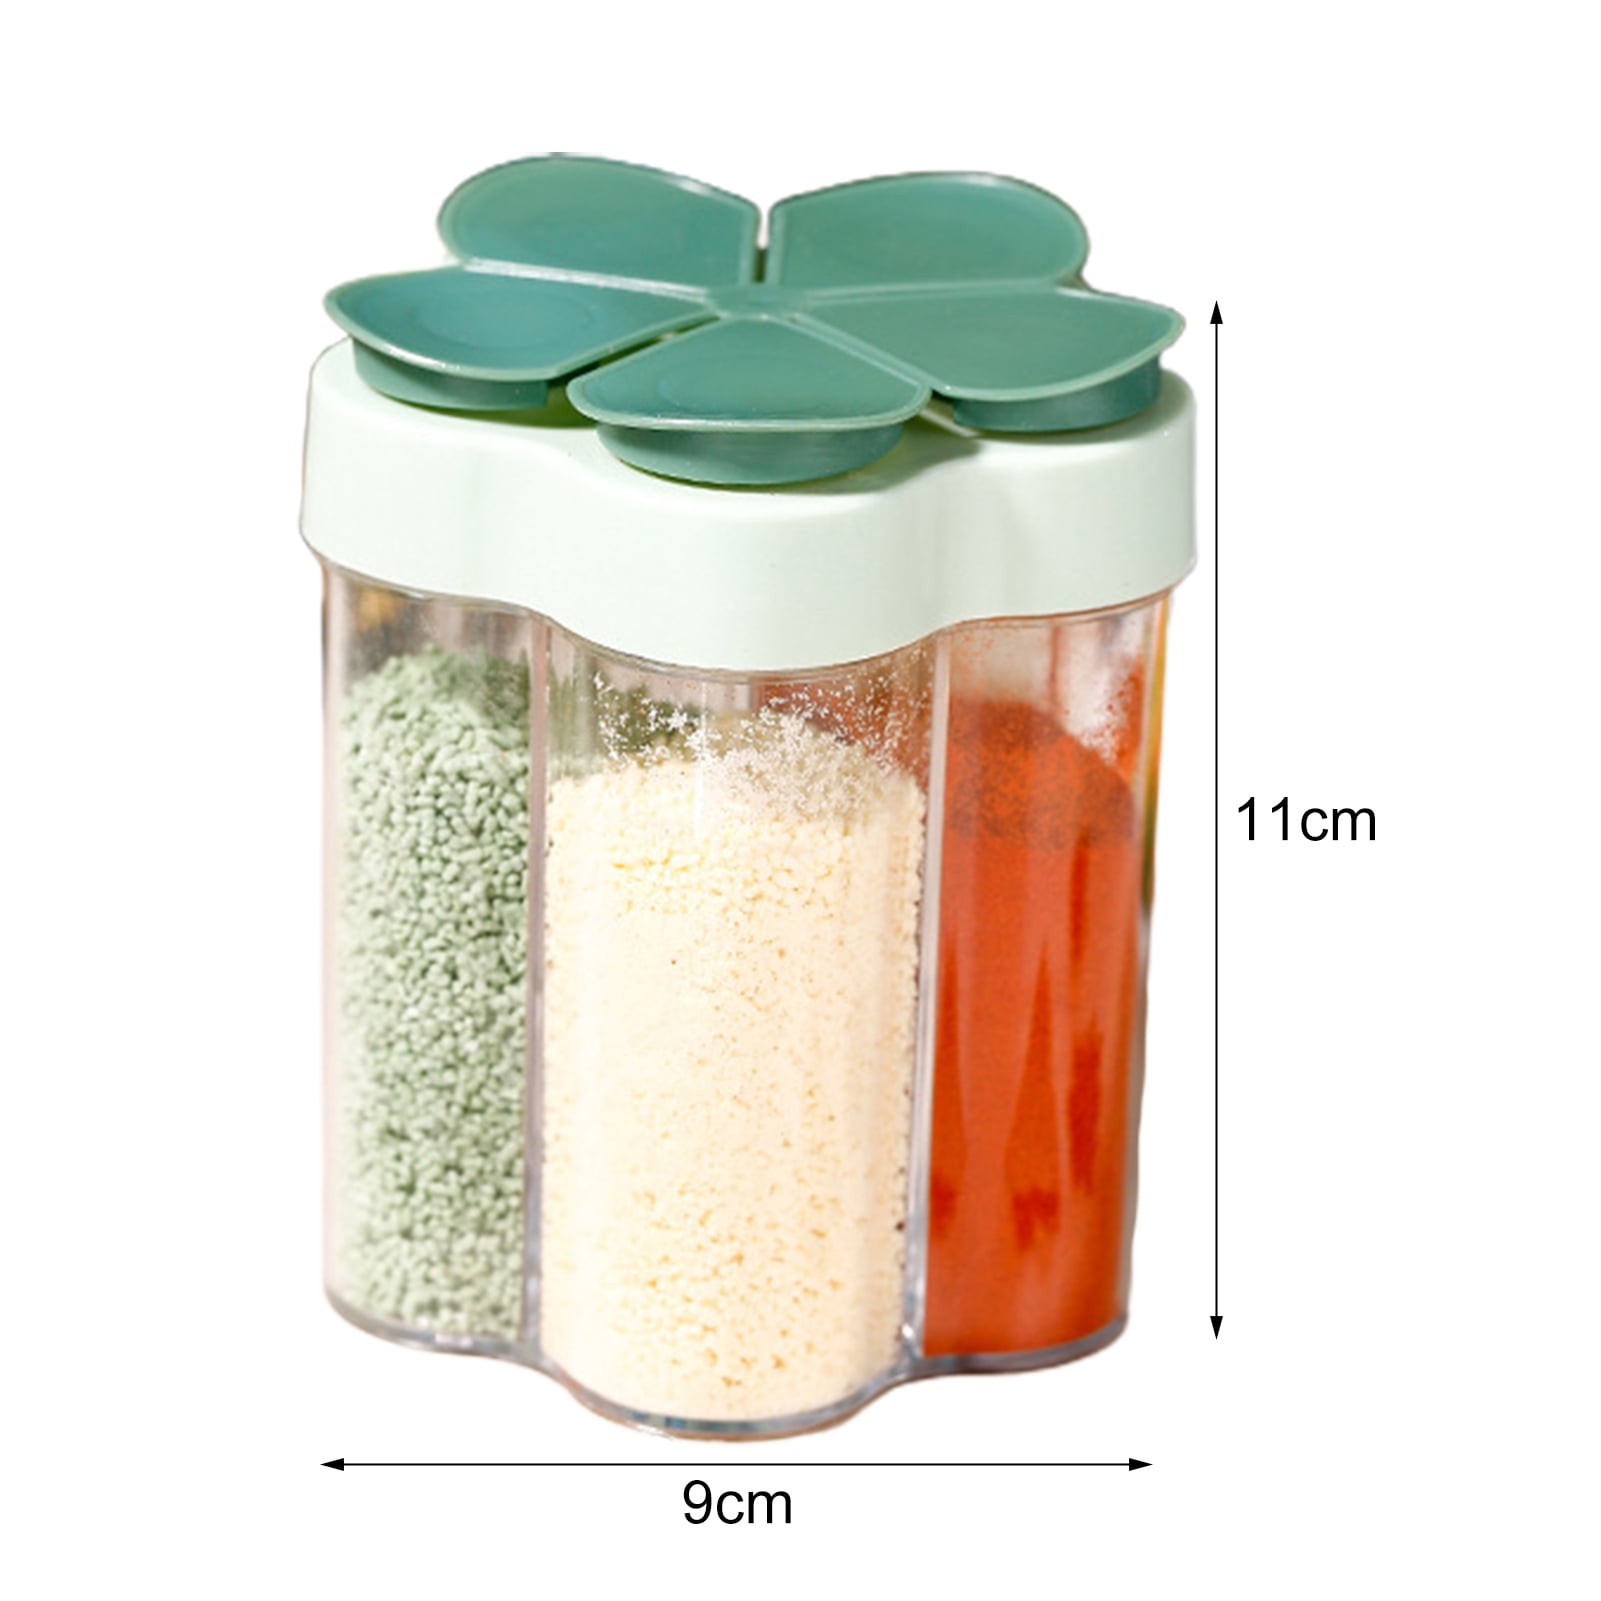 hwojjha 5 in 1 Travel Spice Containers, Shaker Jars, Clear Plastic Container Jars with Labels, Airtight Cap, Pour/Sift Shaker Lid, Perfect for BBQ